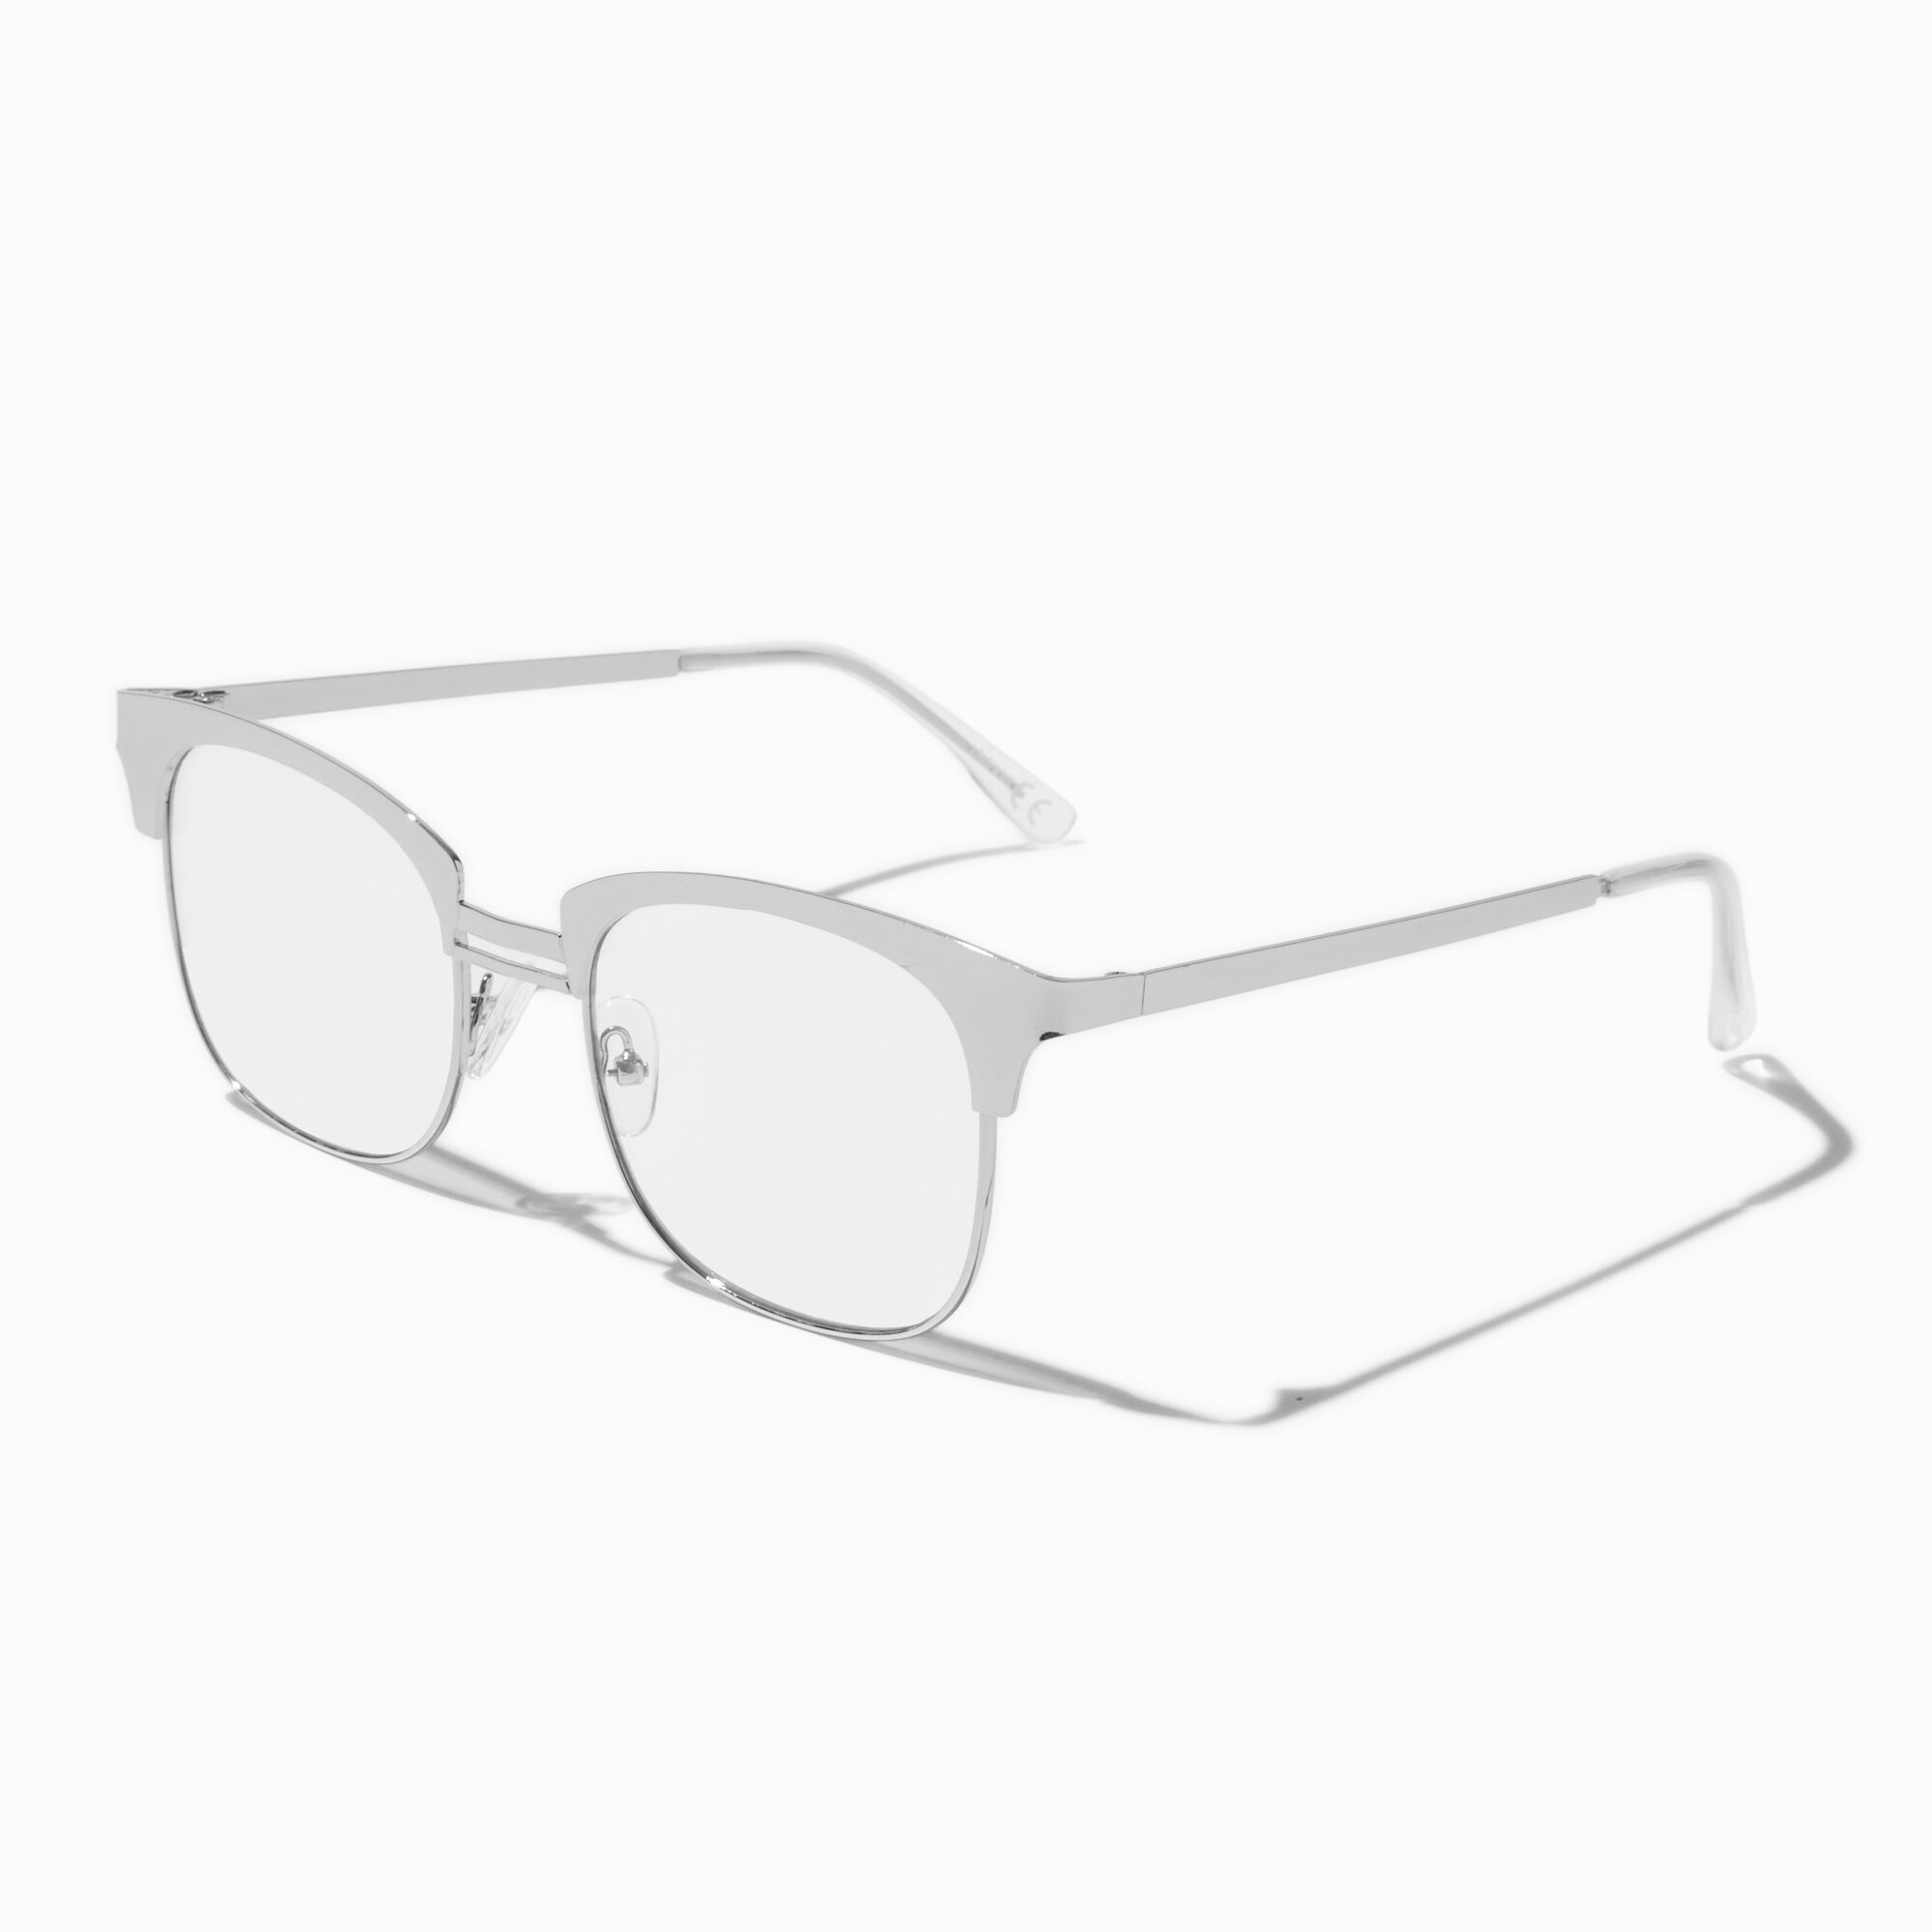 View Claires Solar Light Reducing SilverTone Browline Clear Lens Frames Blue information